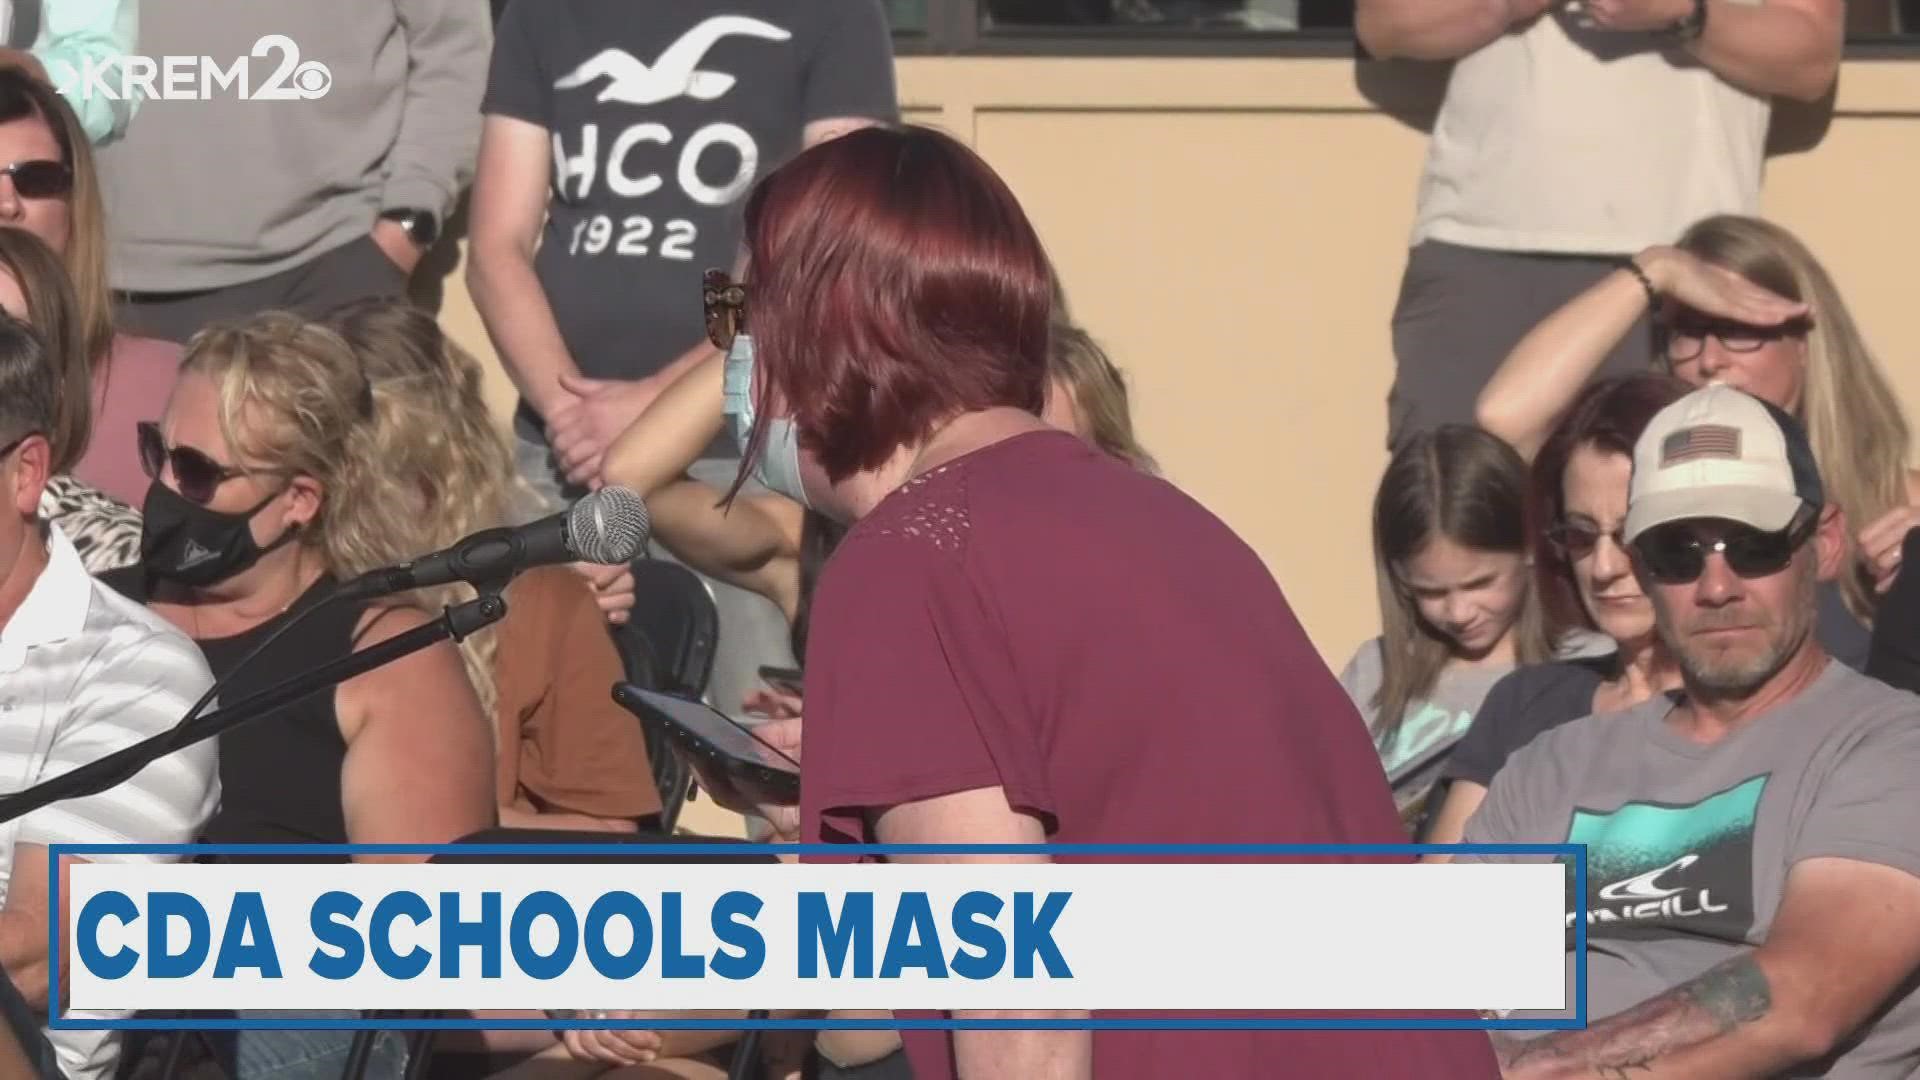 Protesters clash at a CDA school board meeting and more top stories on  Krem2 News at 10 p.m.